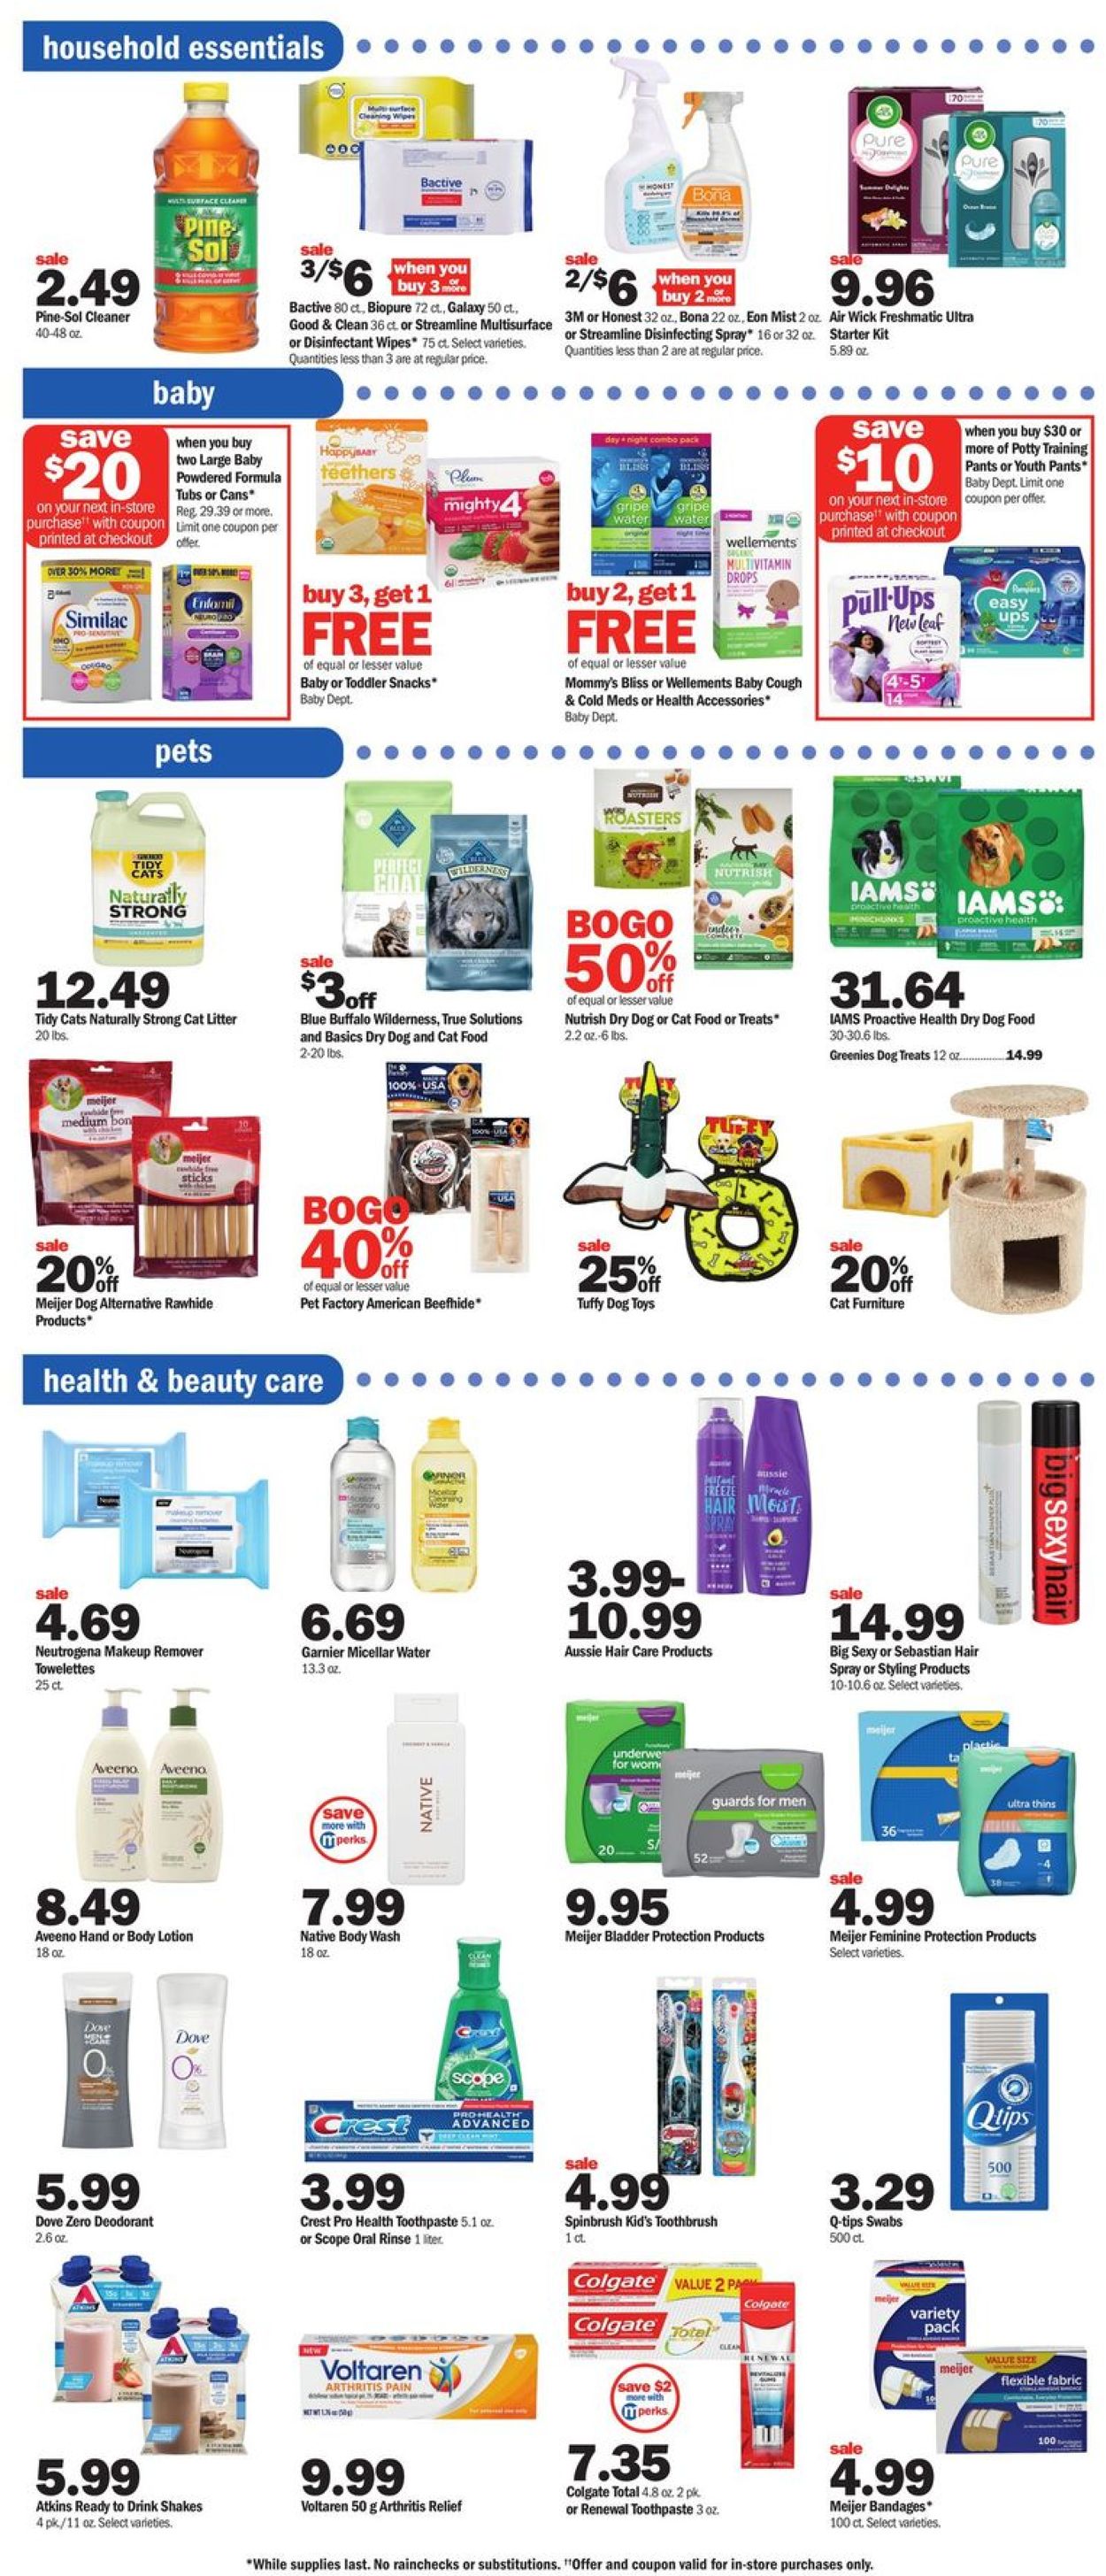 Meijer - Easter 2021 ad Weekly Ad Circular - valid 03/28-04/03/2021 (Page 15)